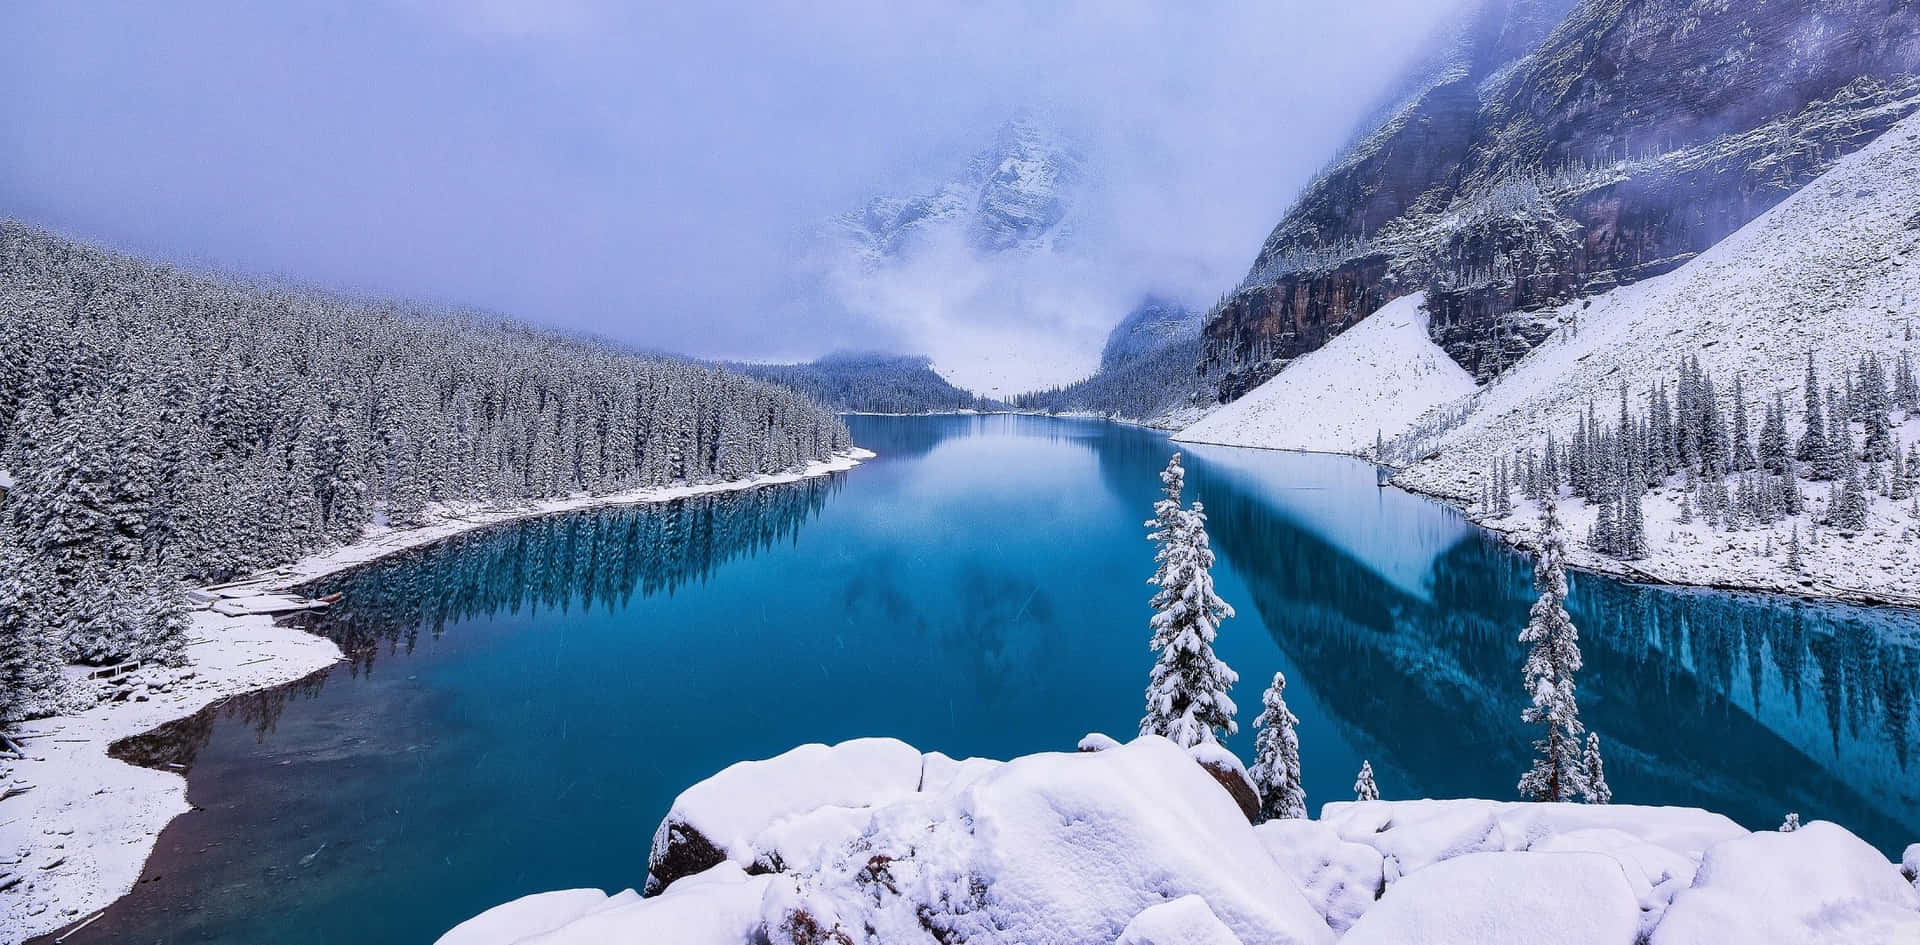 A Lake In The Snow Covered Mountains